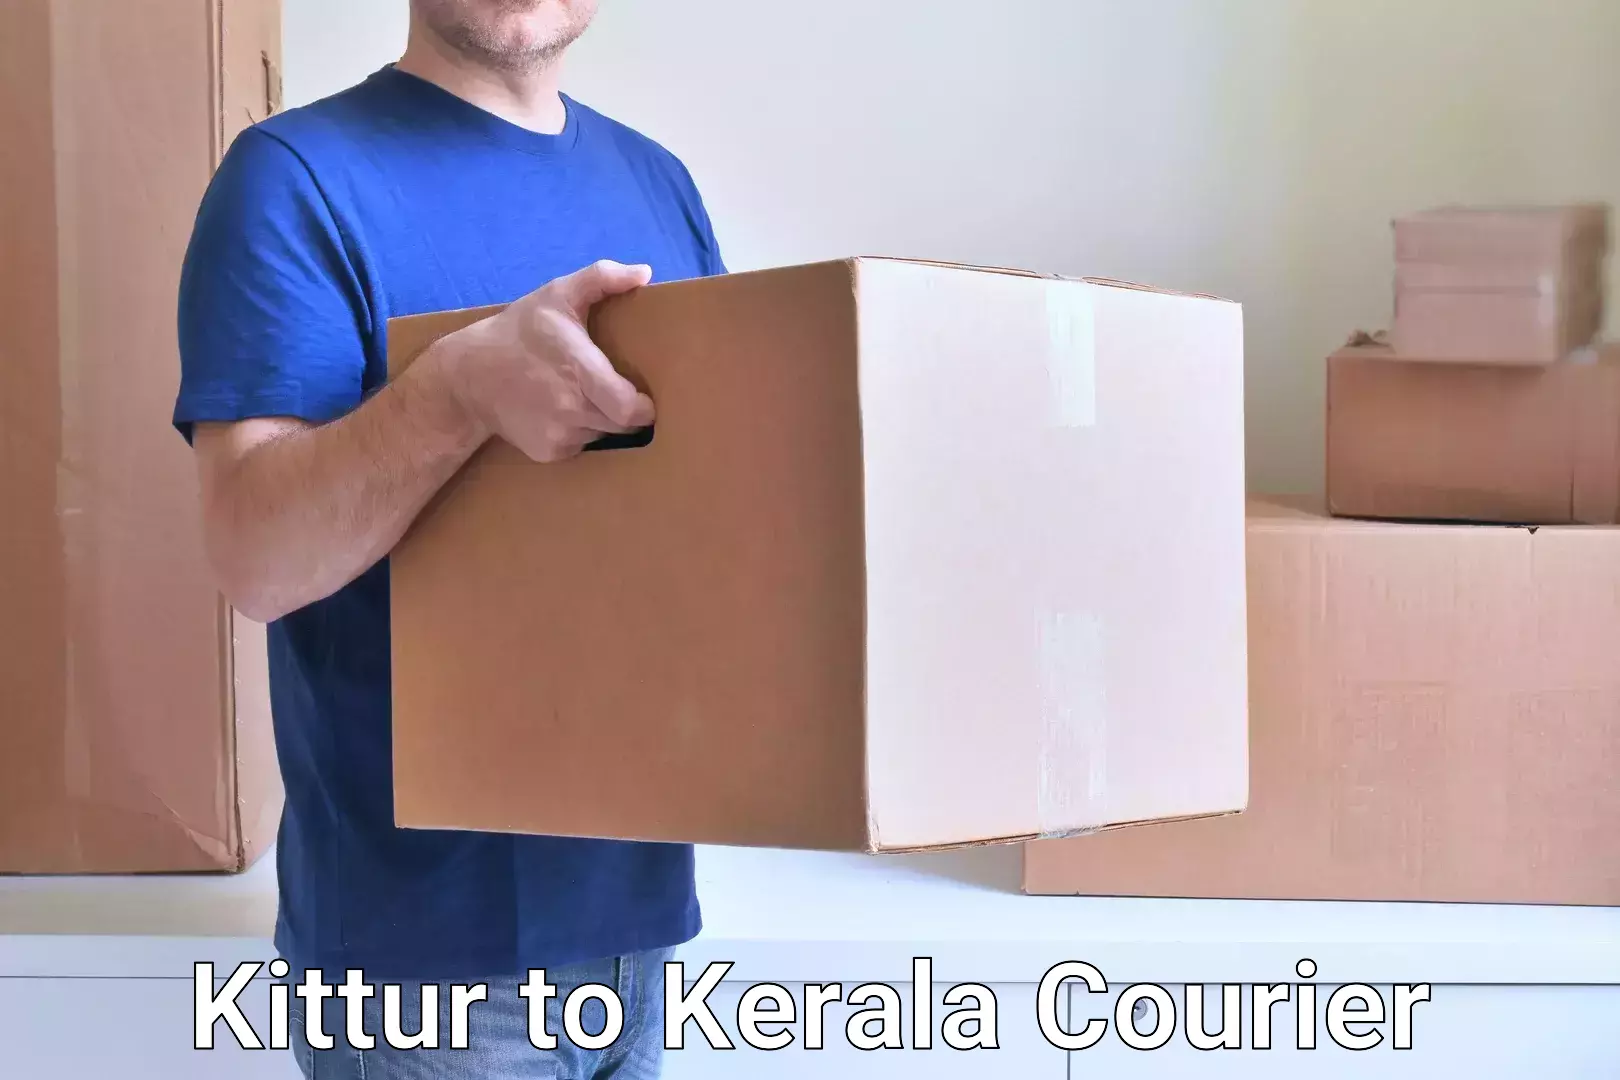 Overnight delivery services Kittur to Cochin Port Kochi